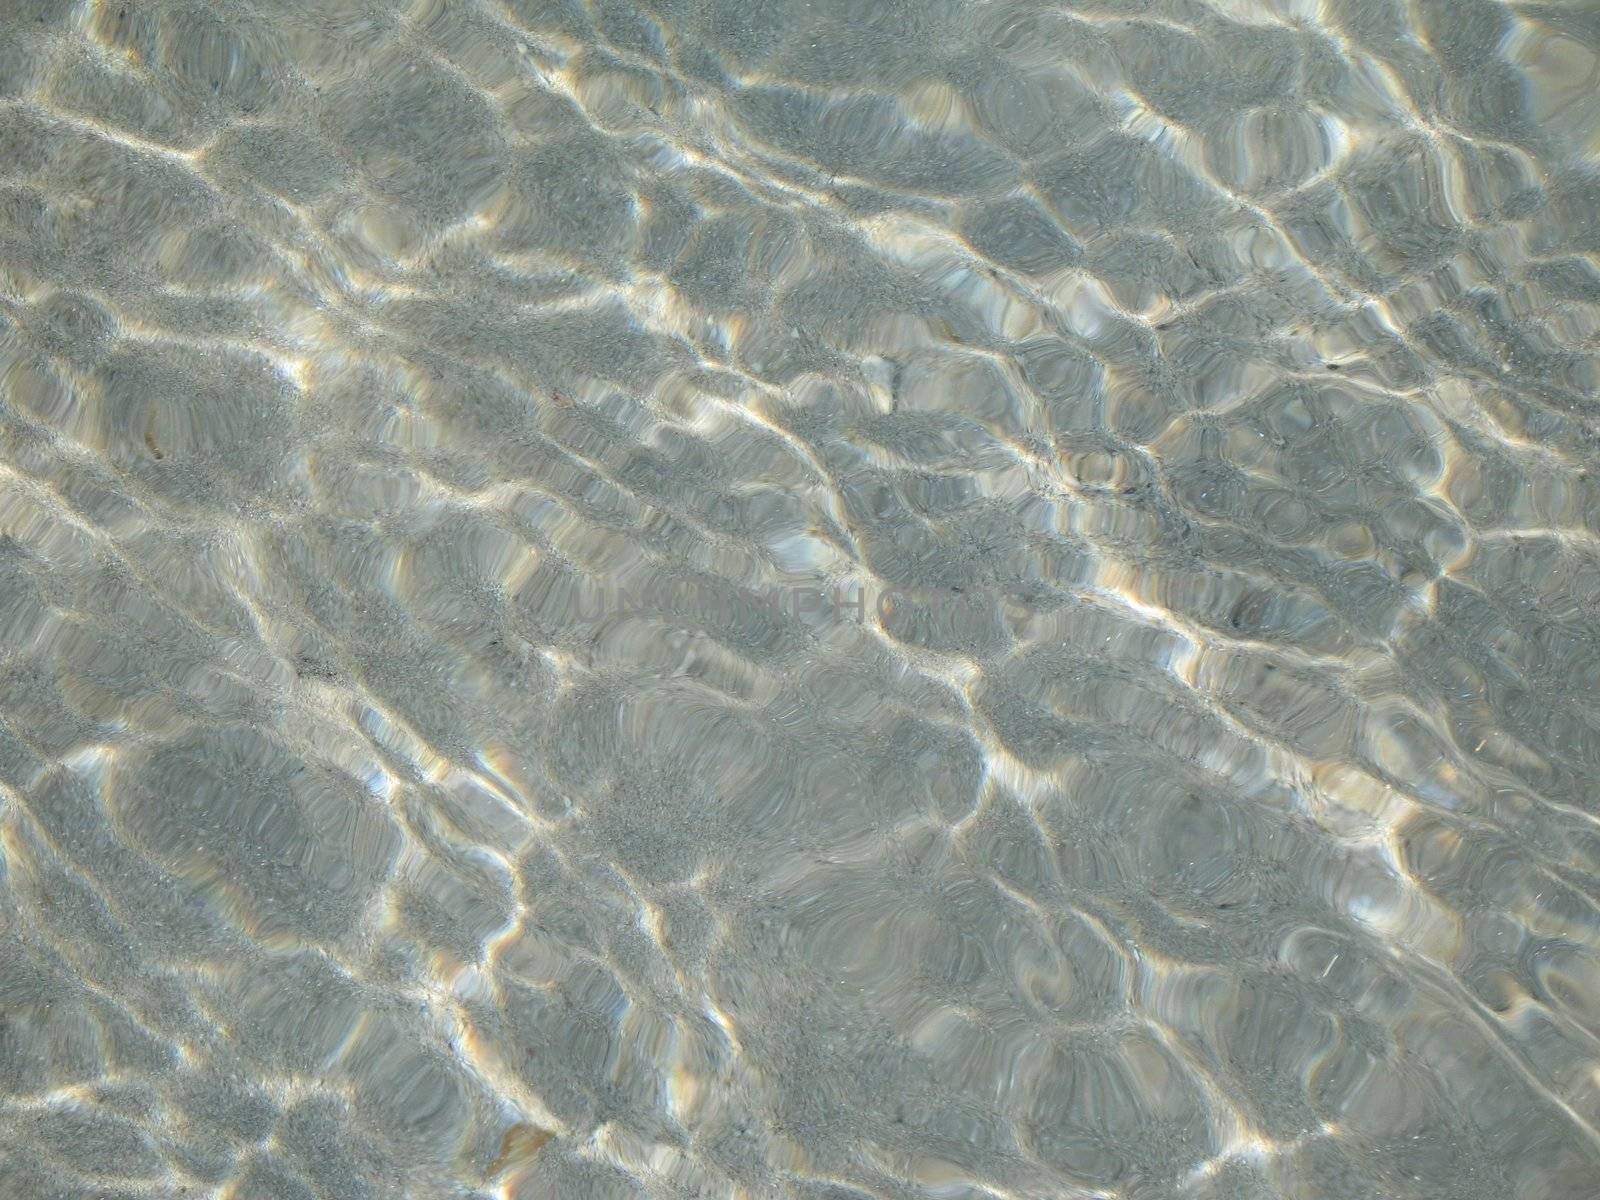 clear water and sand by mmm